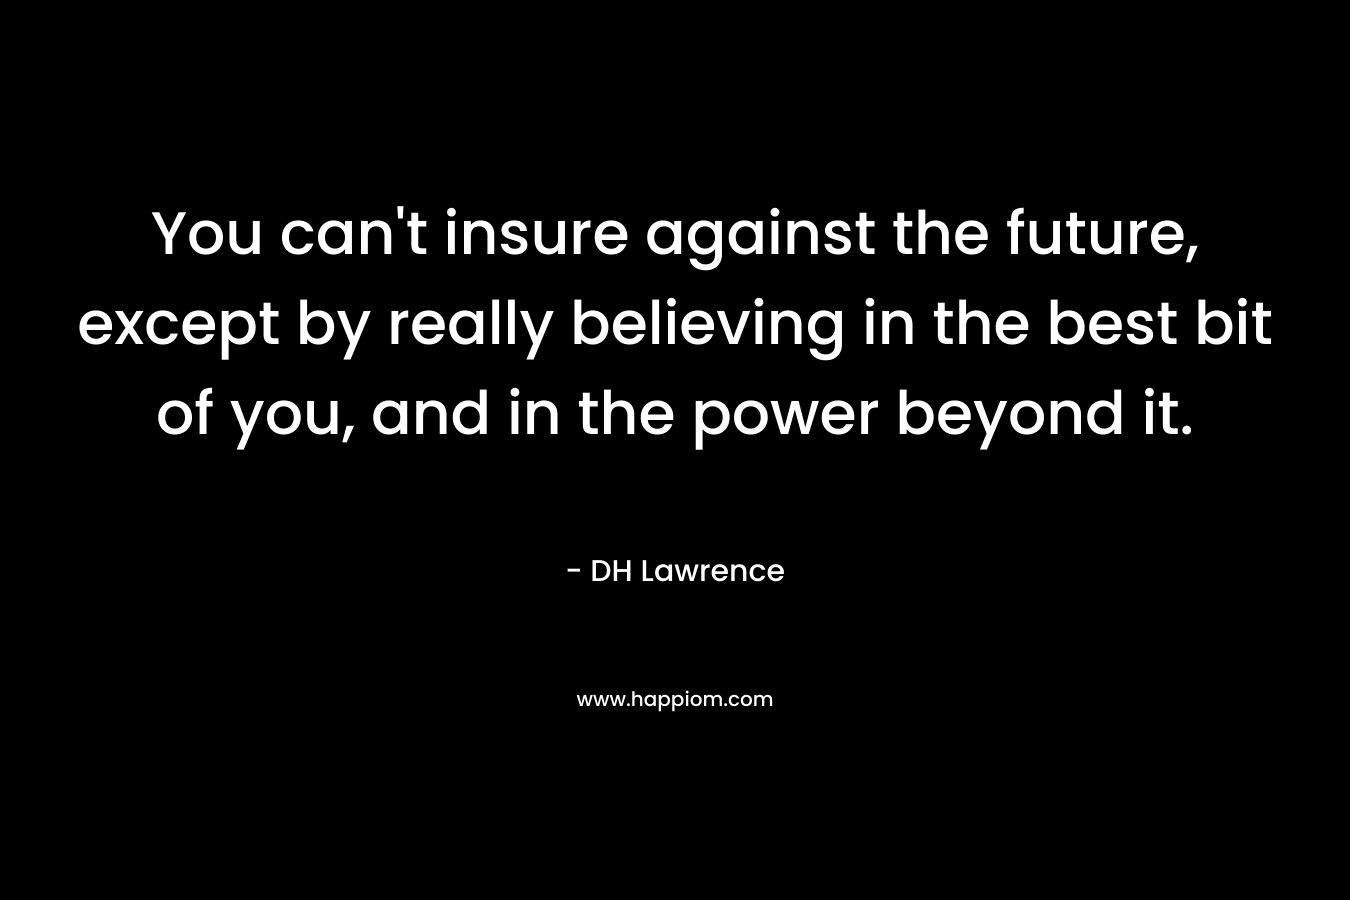 You can't insure against the future, except by really believing in the best bit of you, and in the power beyond it.